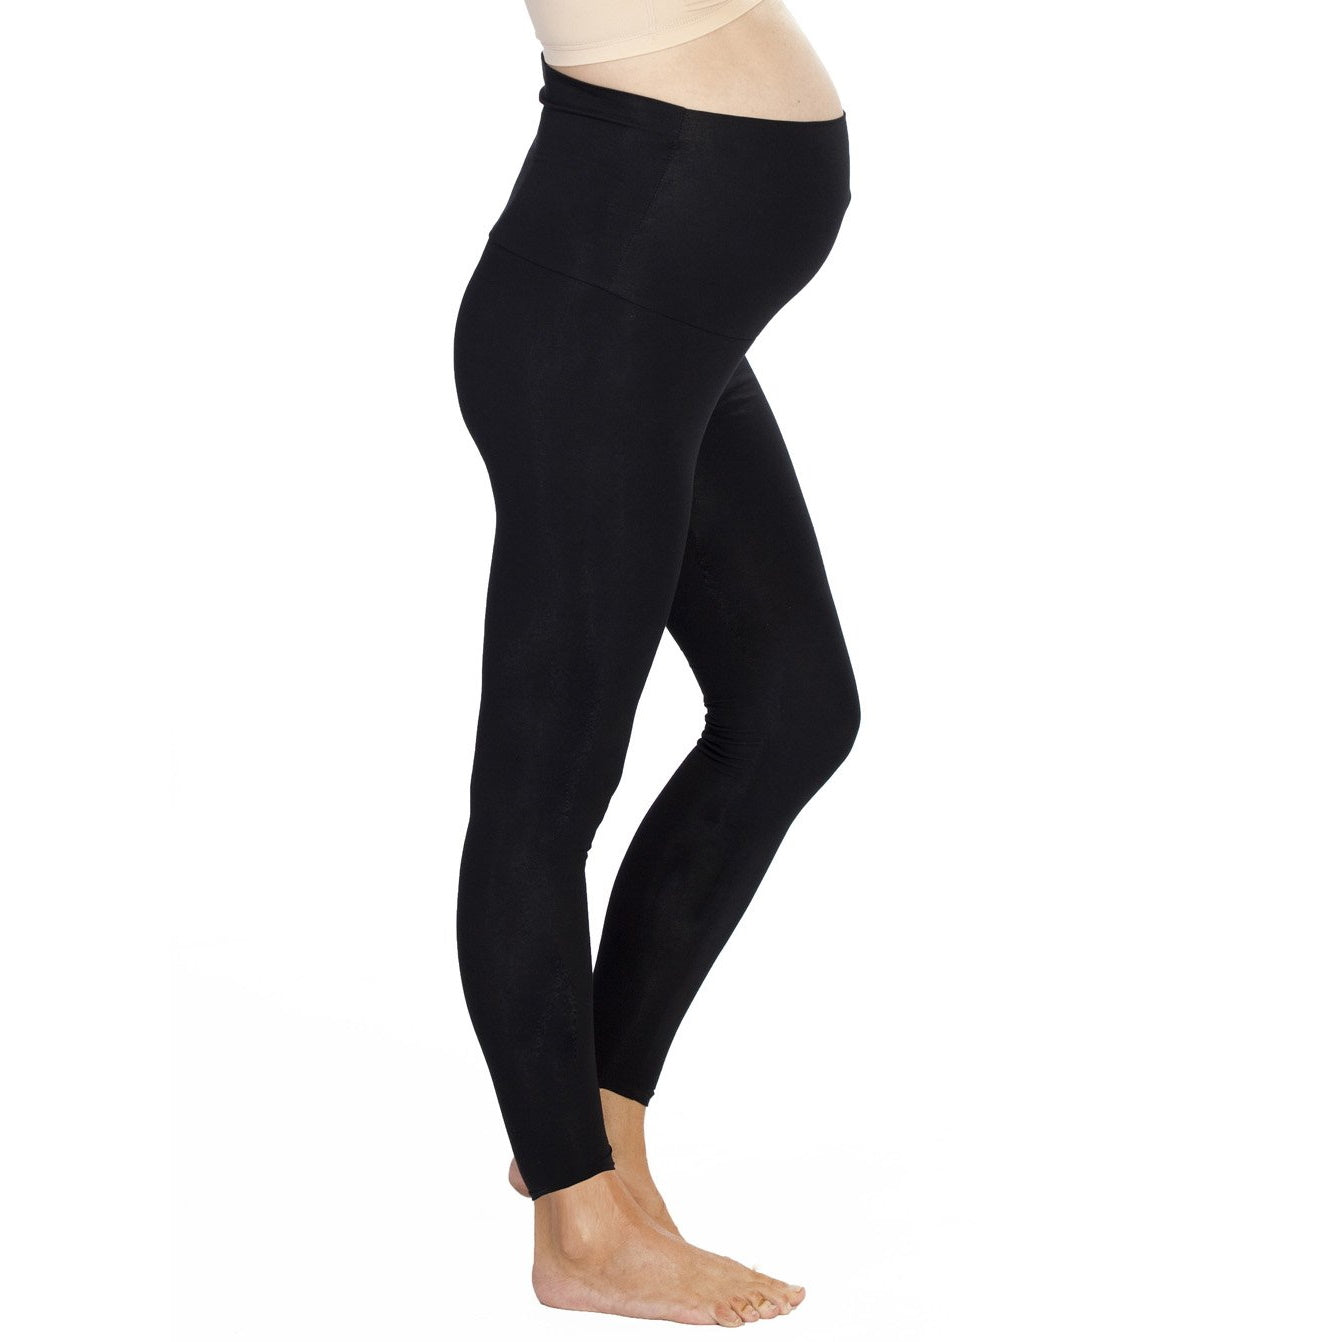 Maternity Pants, Tights & Skirts For Growing Bumps – Belly Beyond